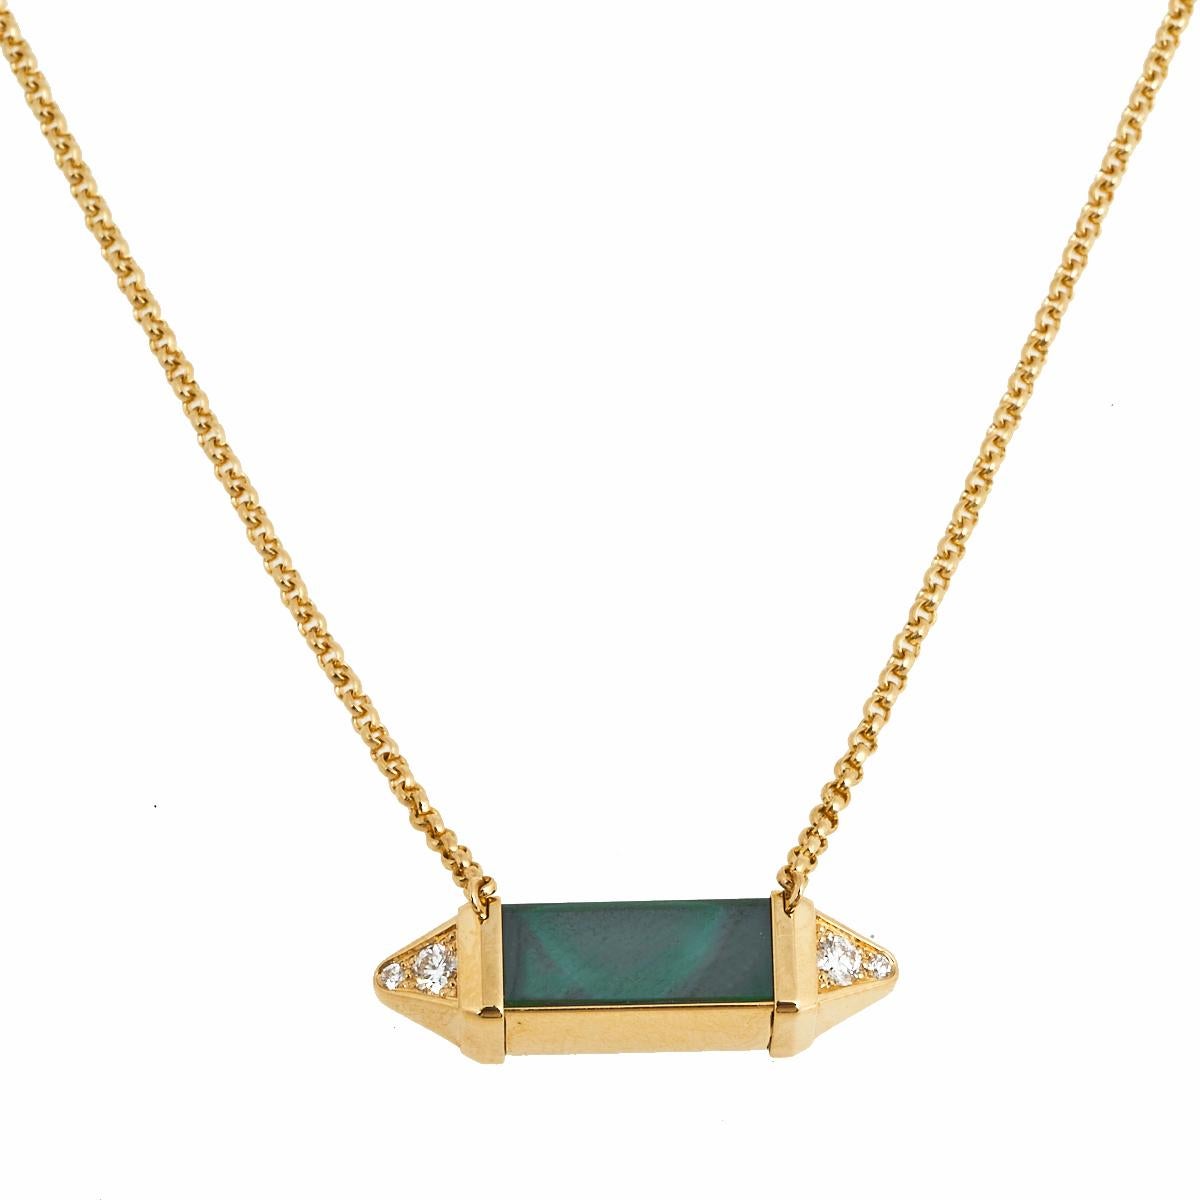 The Cartier Les Berlingots de Cartier necklace brings the best of craftsmanship and elegance. This medium model is made of 18k yellow gold and the stunning pendant is laid with malachite and diamonds.

Includes: Original Box, Original Case,